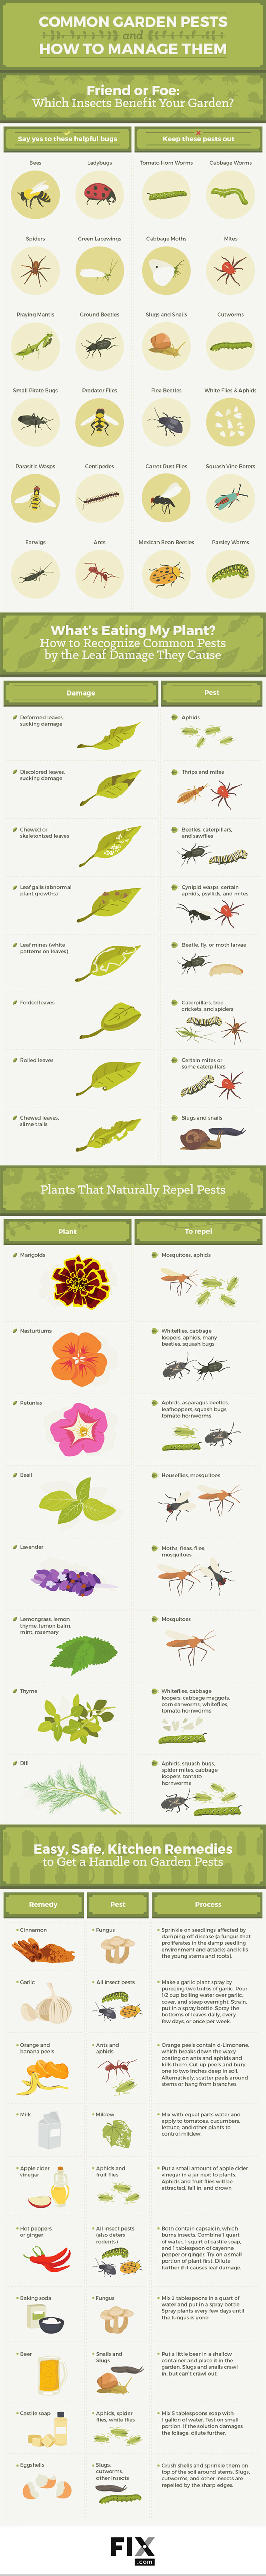 Common Garden Pests How to Manage Them Infographic